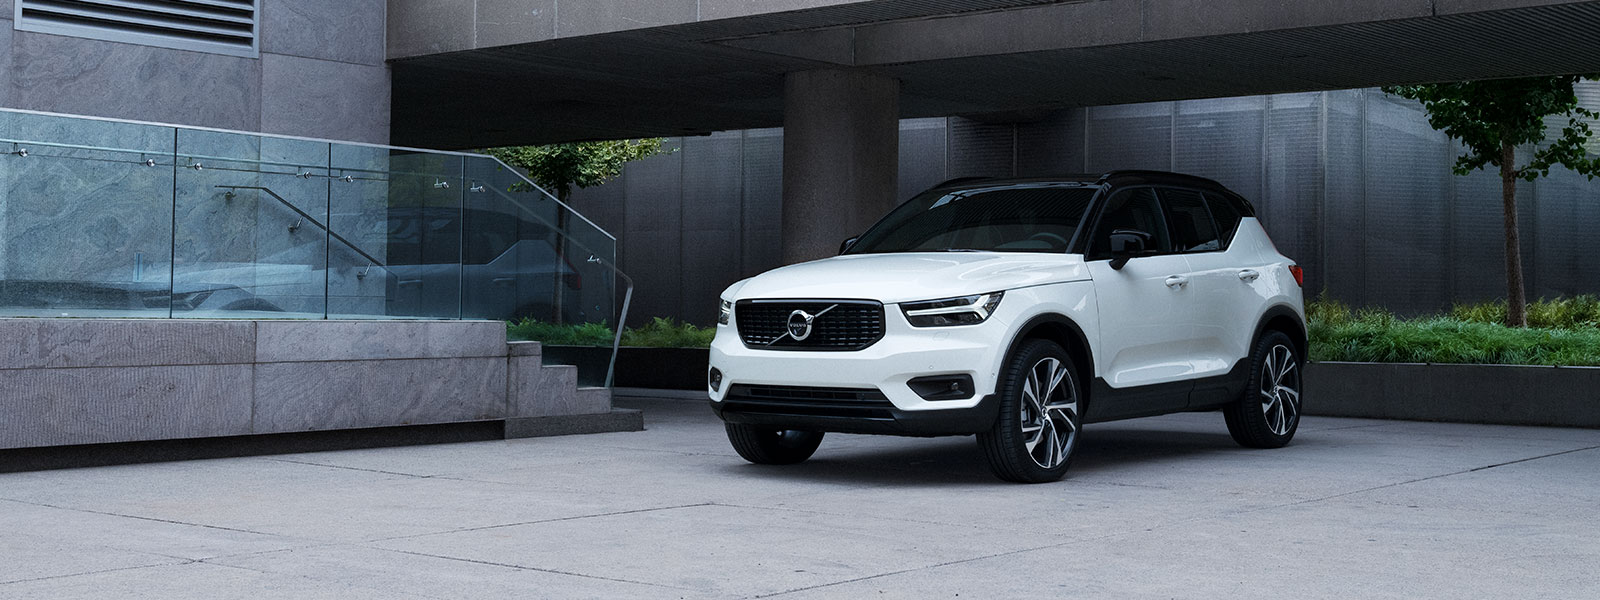 New Volvo XC40 SUV for sale in Topsham, ME at Goodwin's Volvo